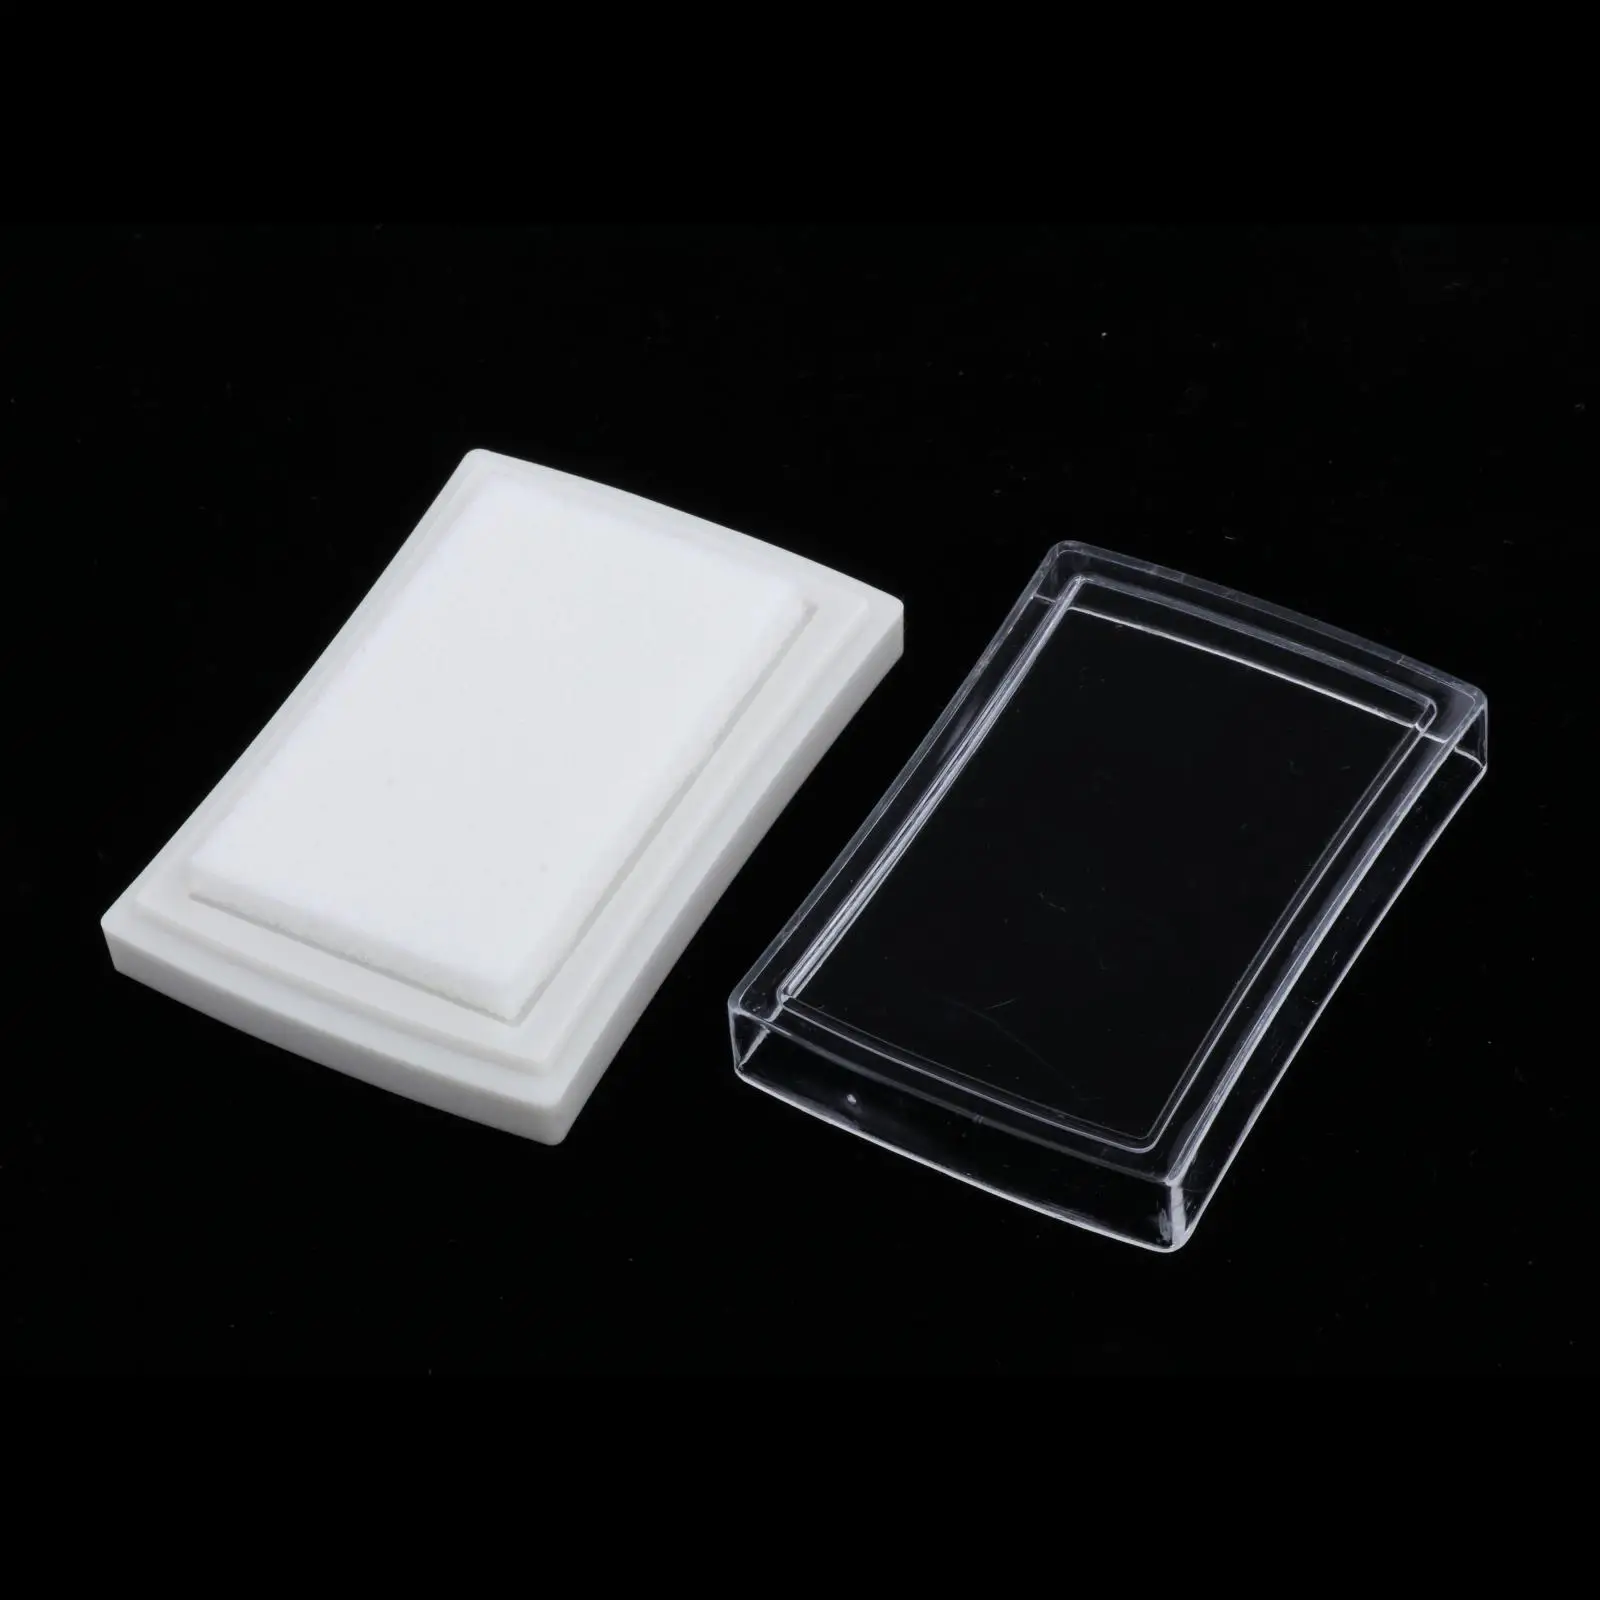 Creative DIY Ink pad Blank Set Rubber Stamps Empty Ink Pad stationery Album for scrapbooking Paper decoration